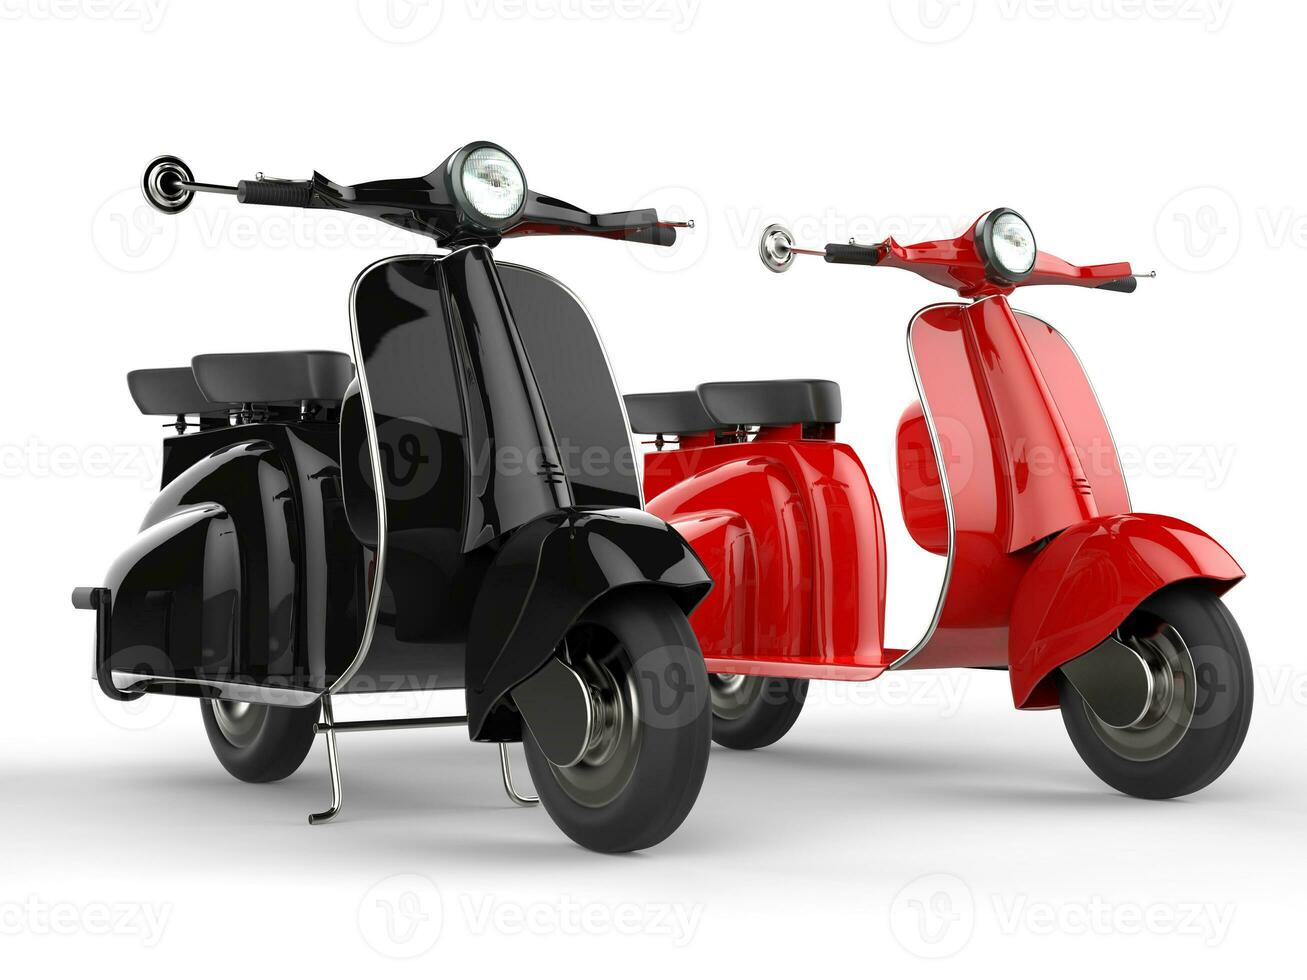 Black and red scooters - side by side photo